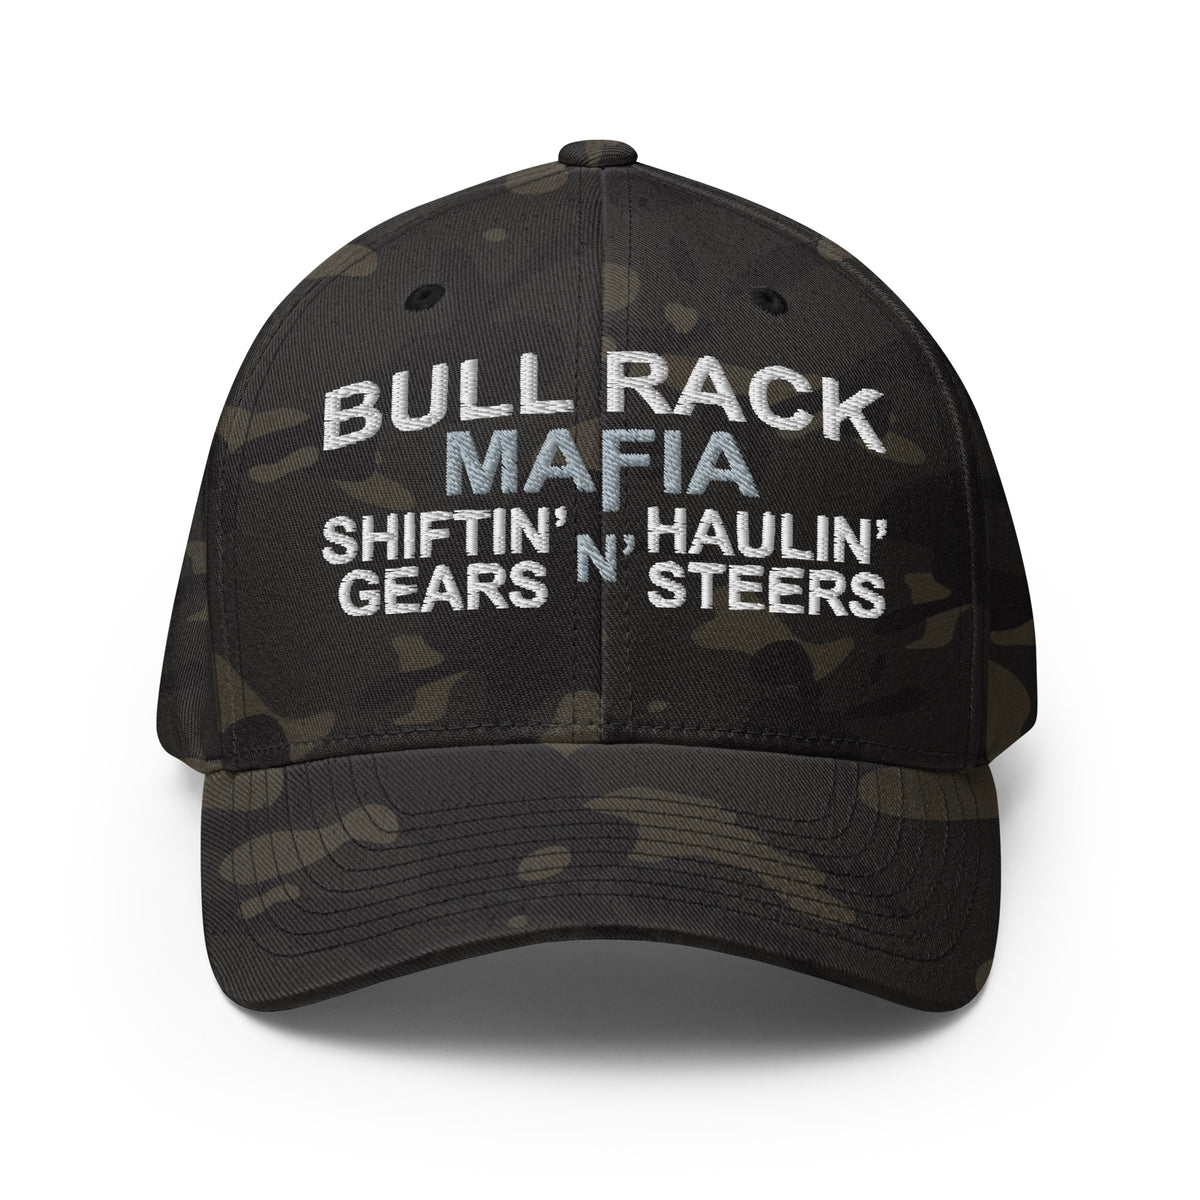 Bull Rack Mafia - Shiftin' Gears - Embroidered Fitted Hat - Free Shipping